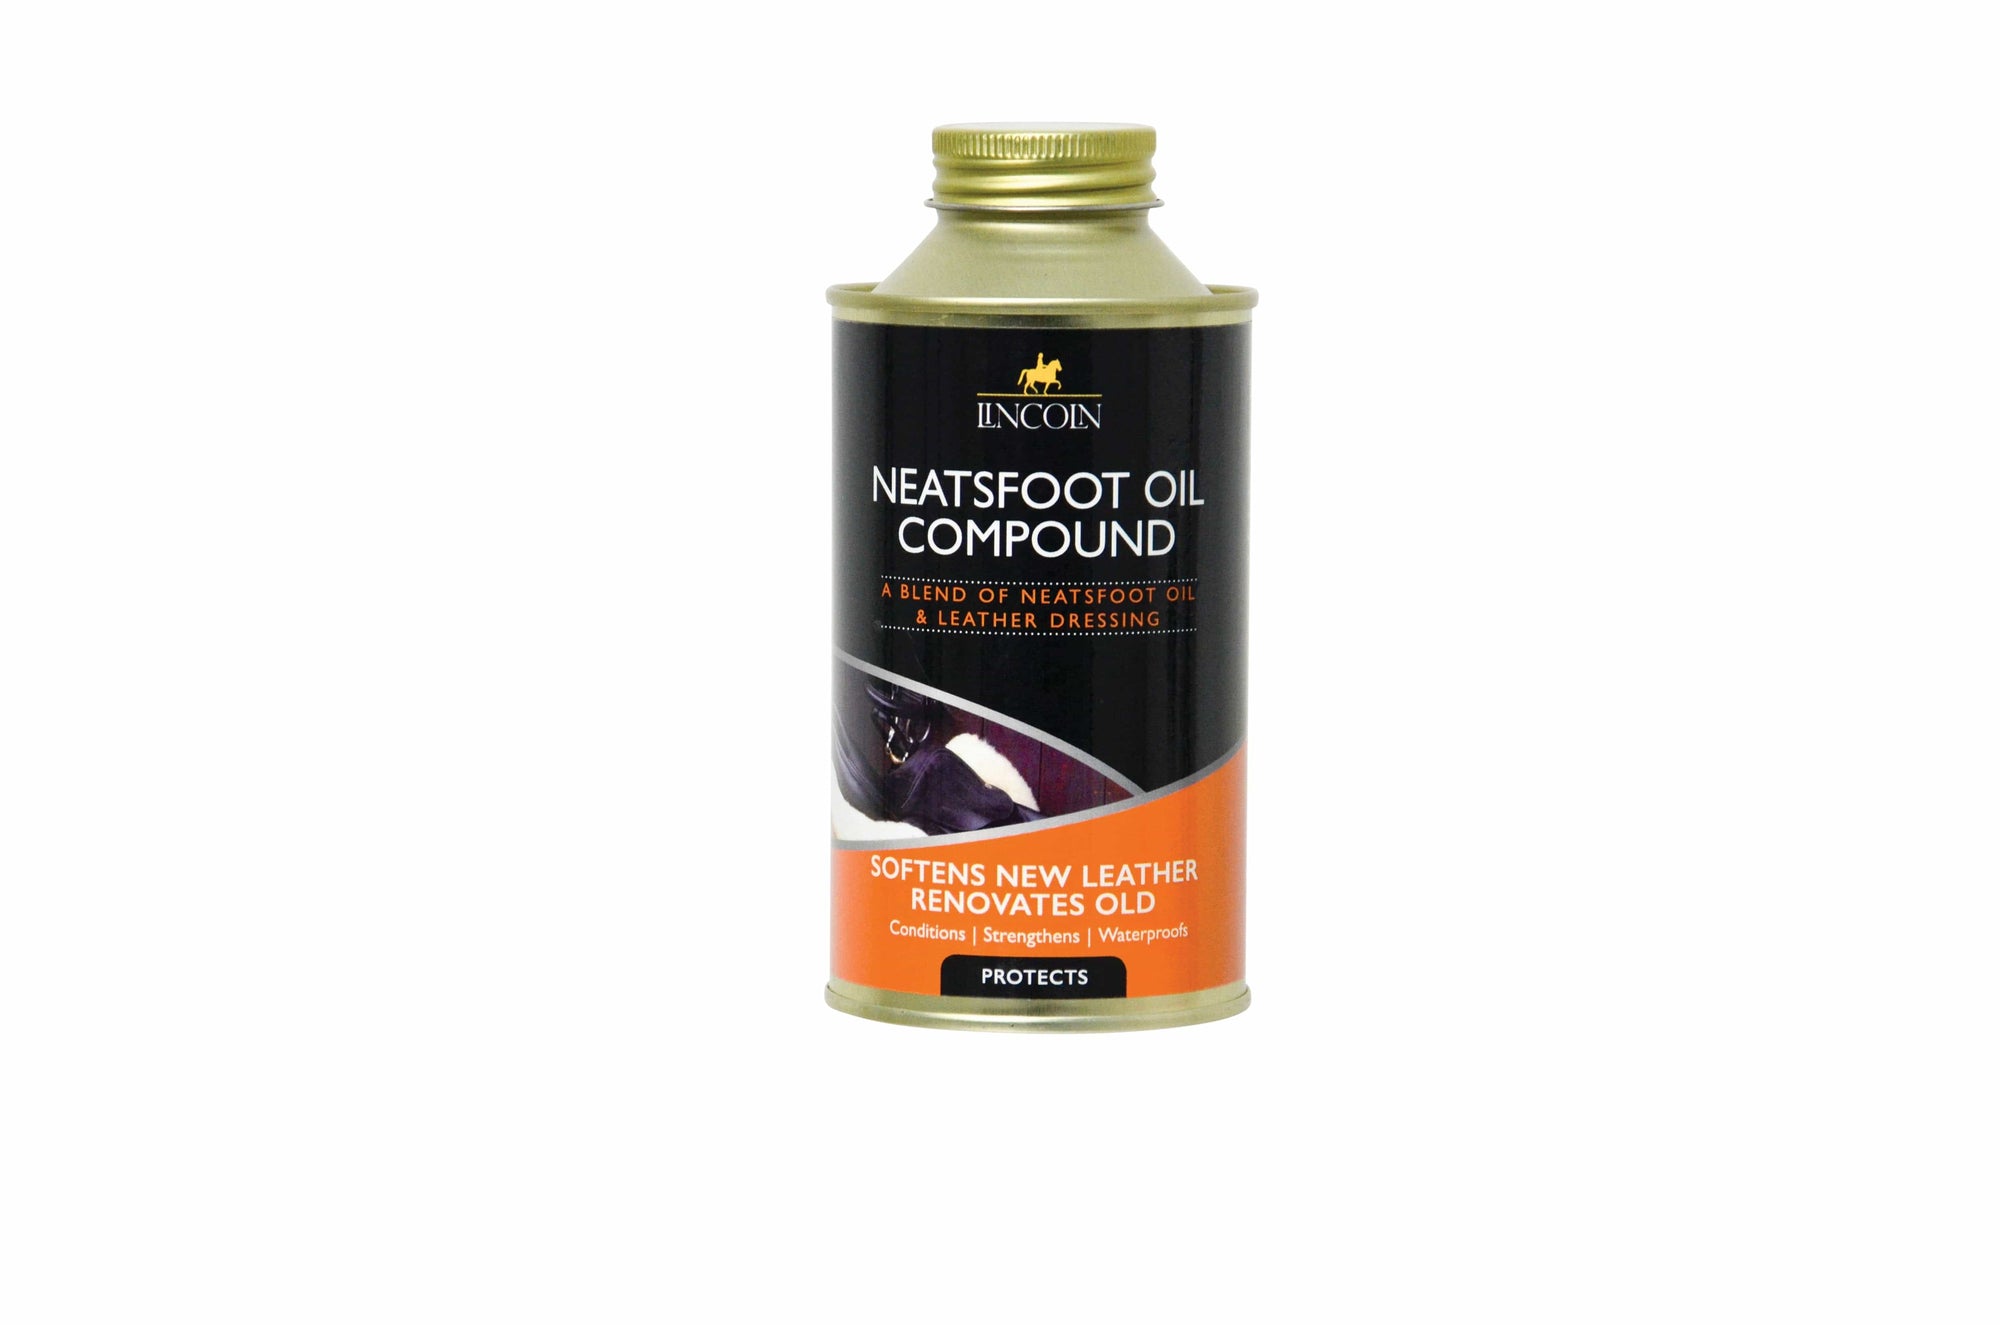 Lincoln neatsfoot oil compound